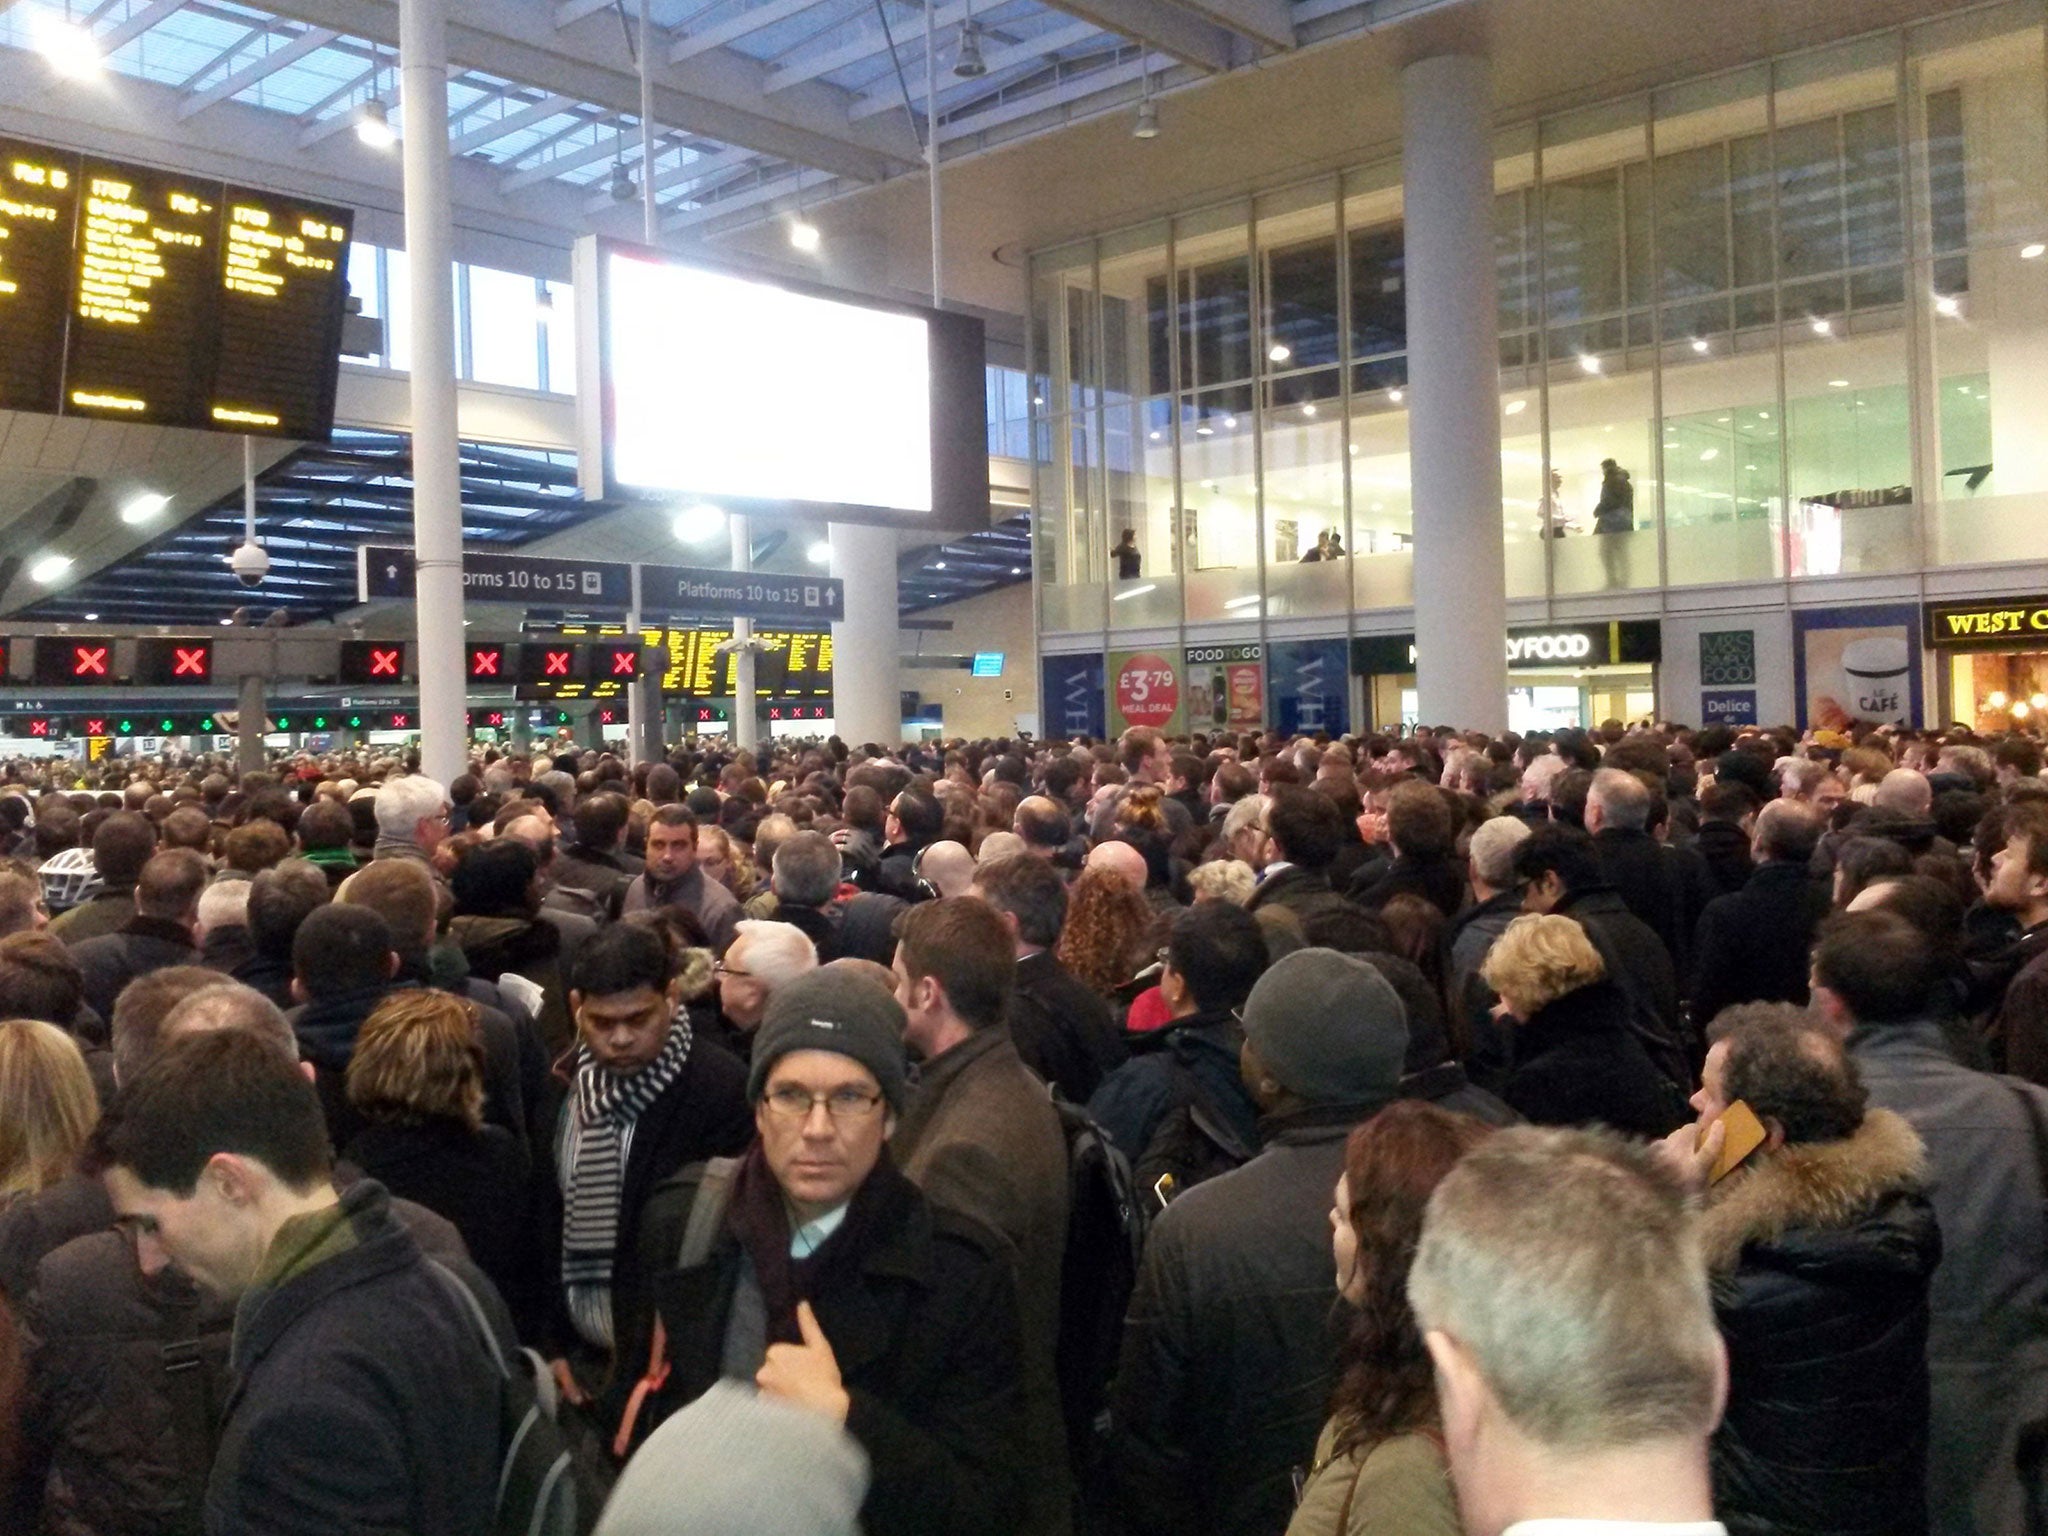 Passengers at London Bridge station as thousands of travellers were left stranded when services ground to a halt during rush hour